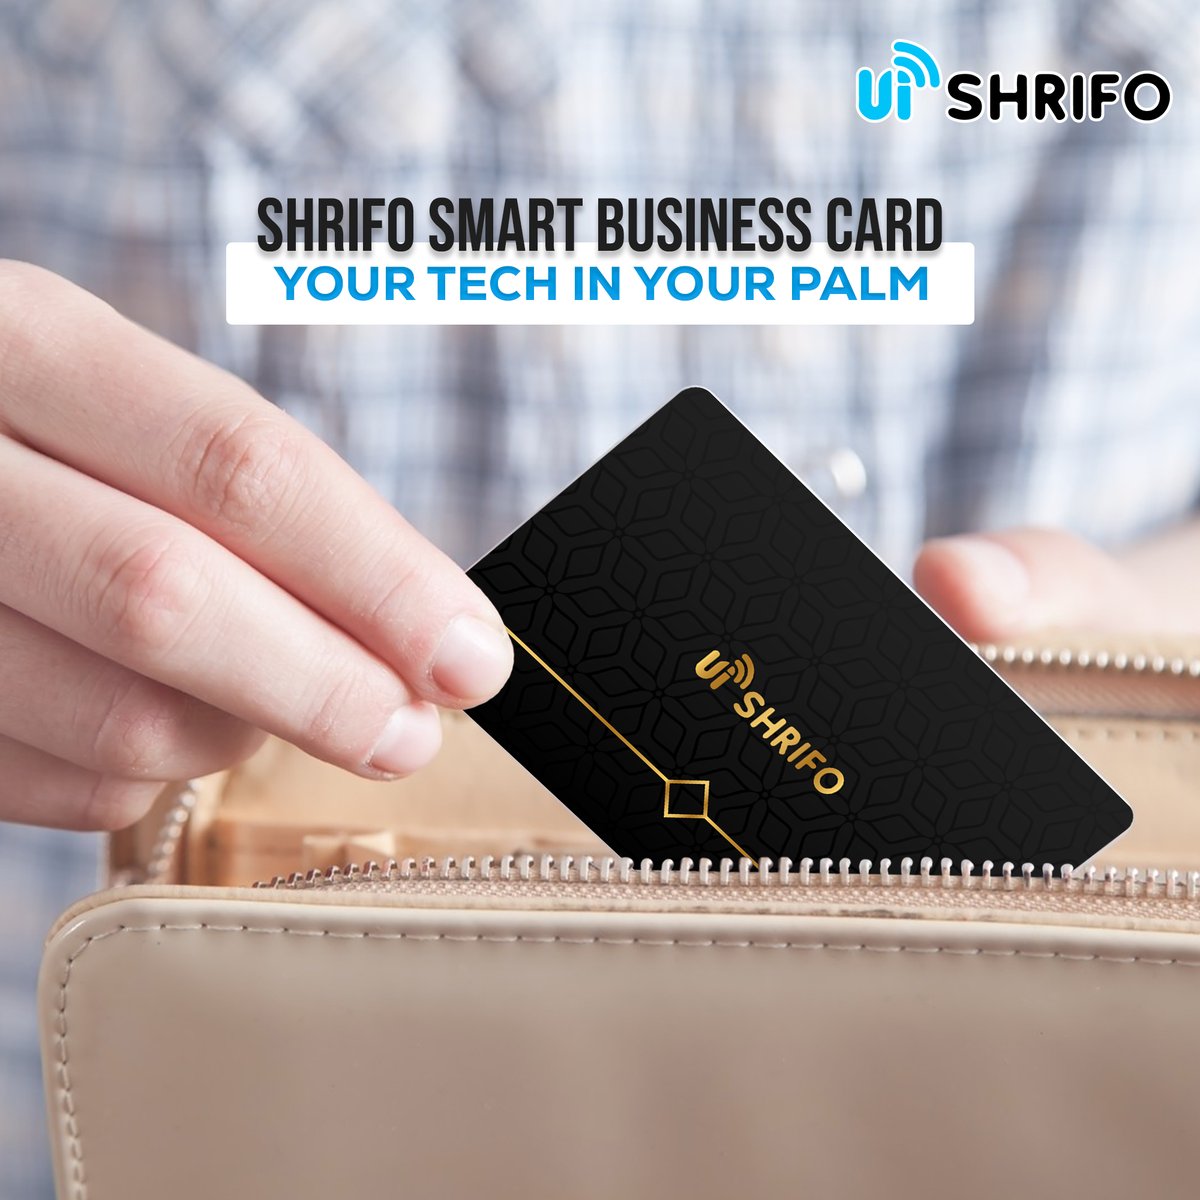 Shrifo Smart Business Card - the ultimate tech solution for professionals on-the-go.
.
.
.
.
.
#ShrifoSmartBusinesscard #digitalidentity #smartbusinesscard #bestbusinesscards #contactlesscard #digitalbusinesscard #infebusinesscard #nfctechnology #businesscard #networking